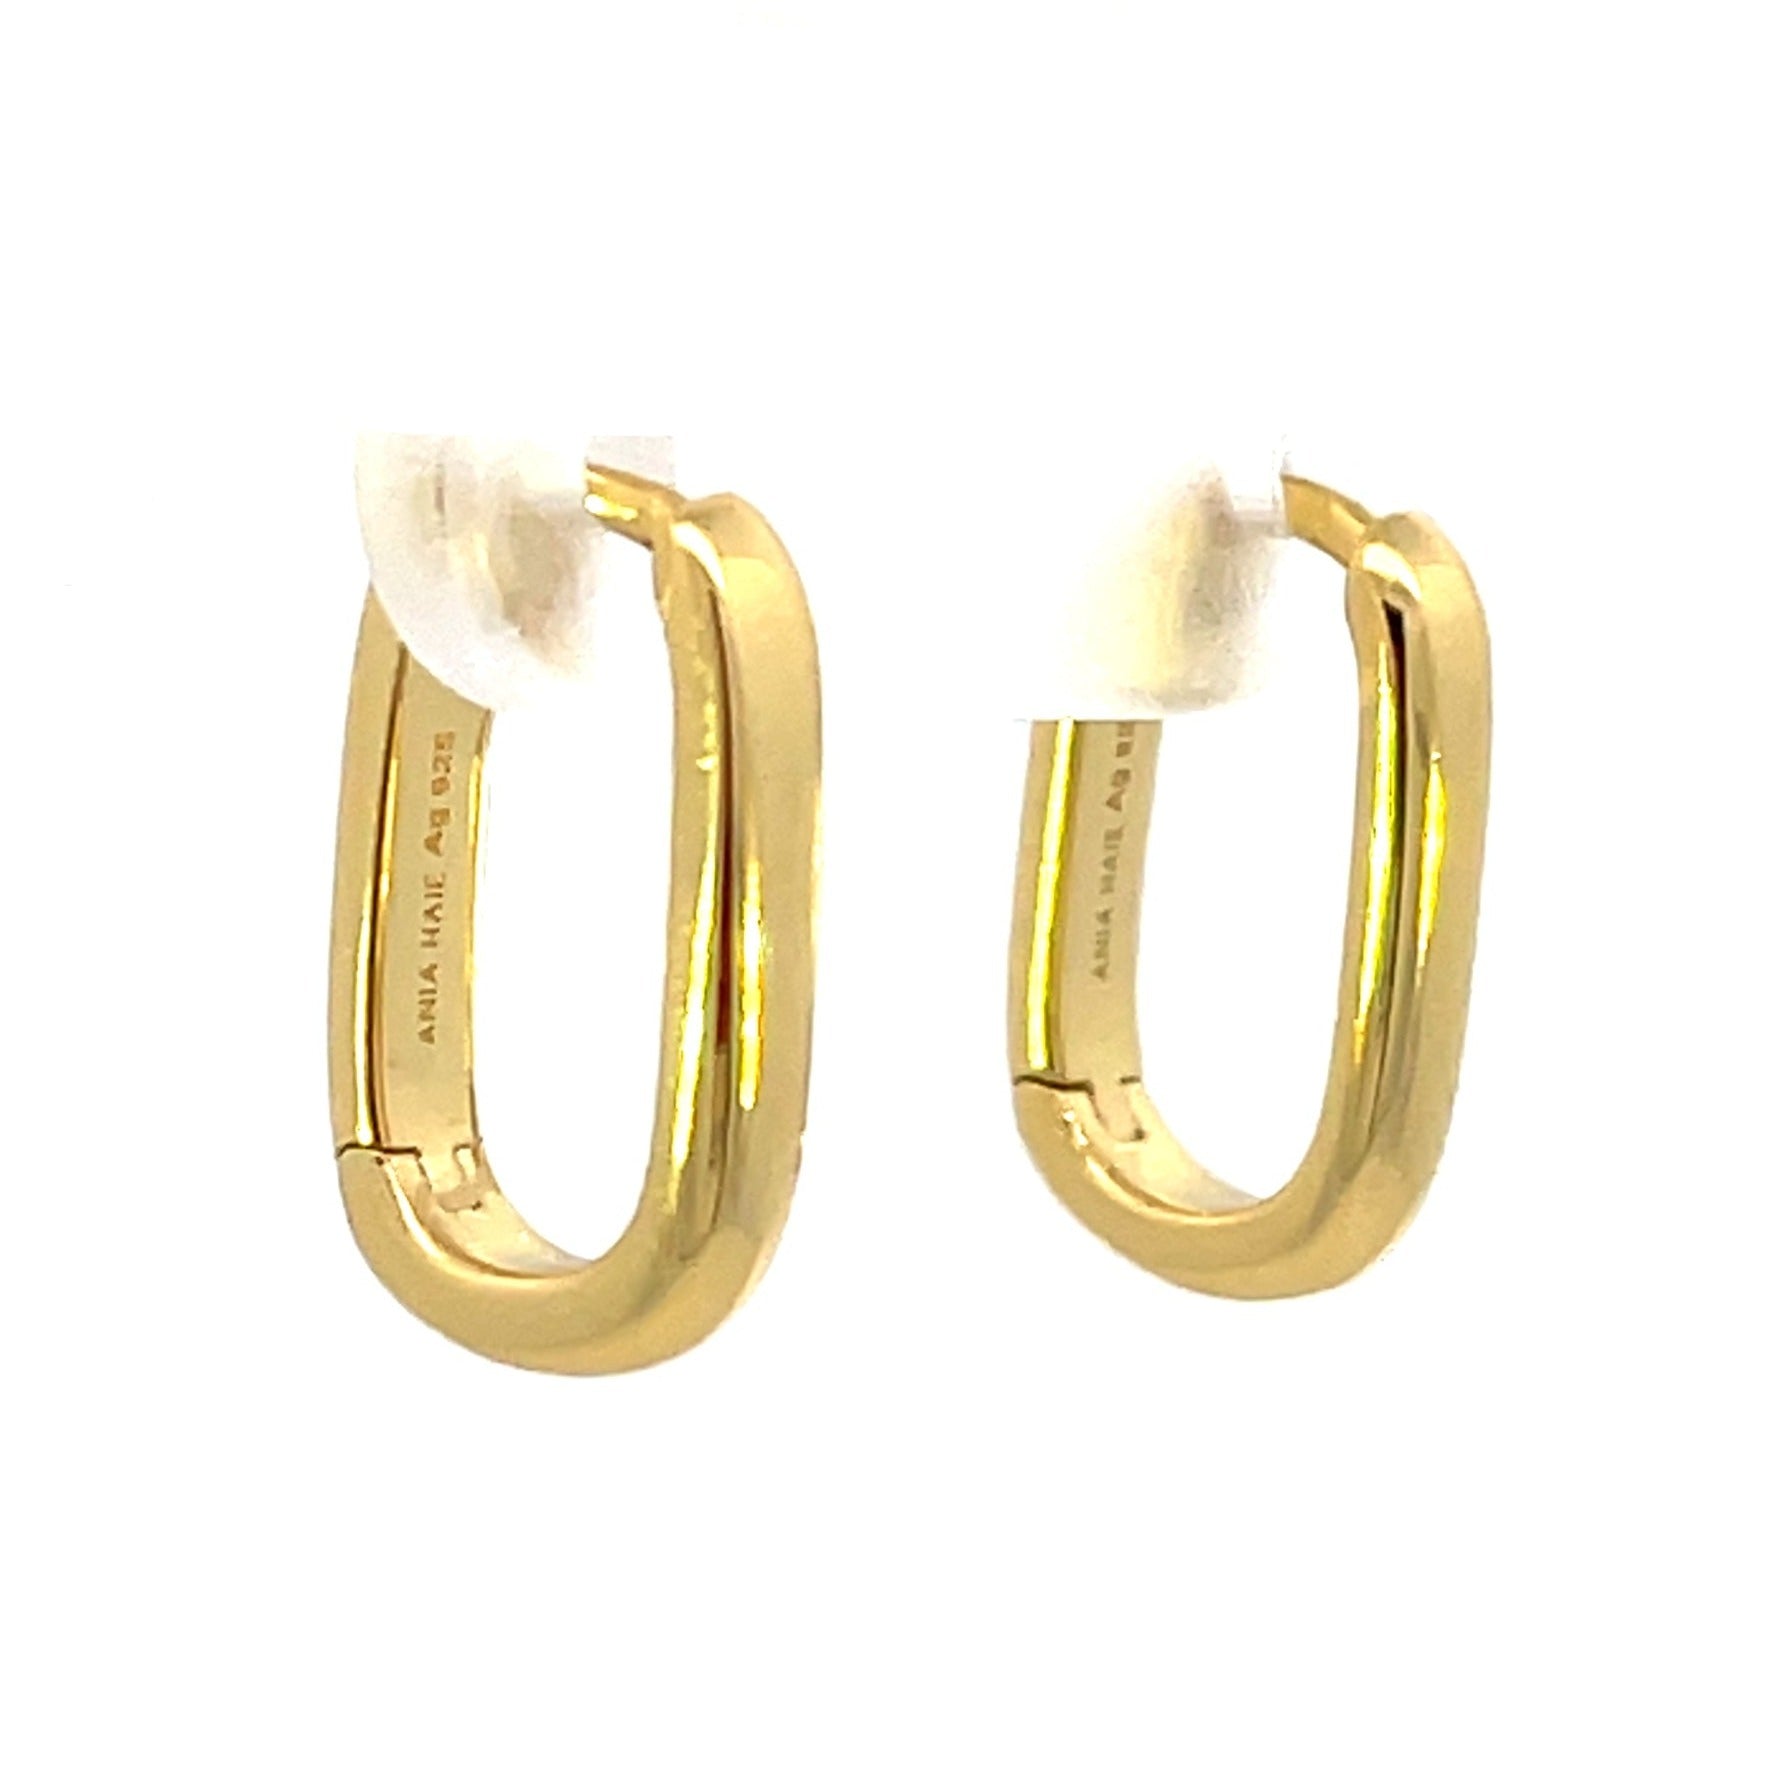 Ania Haie Sterling Silver Oval Hoop Earrings with Gold Overlay sides